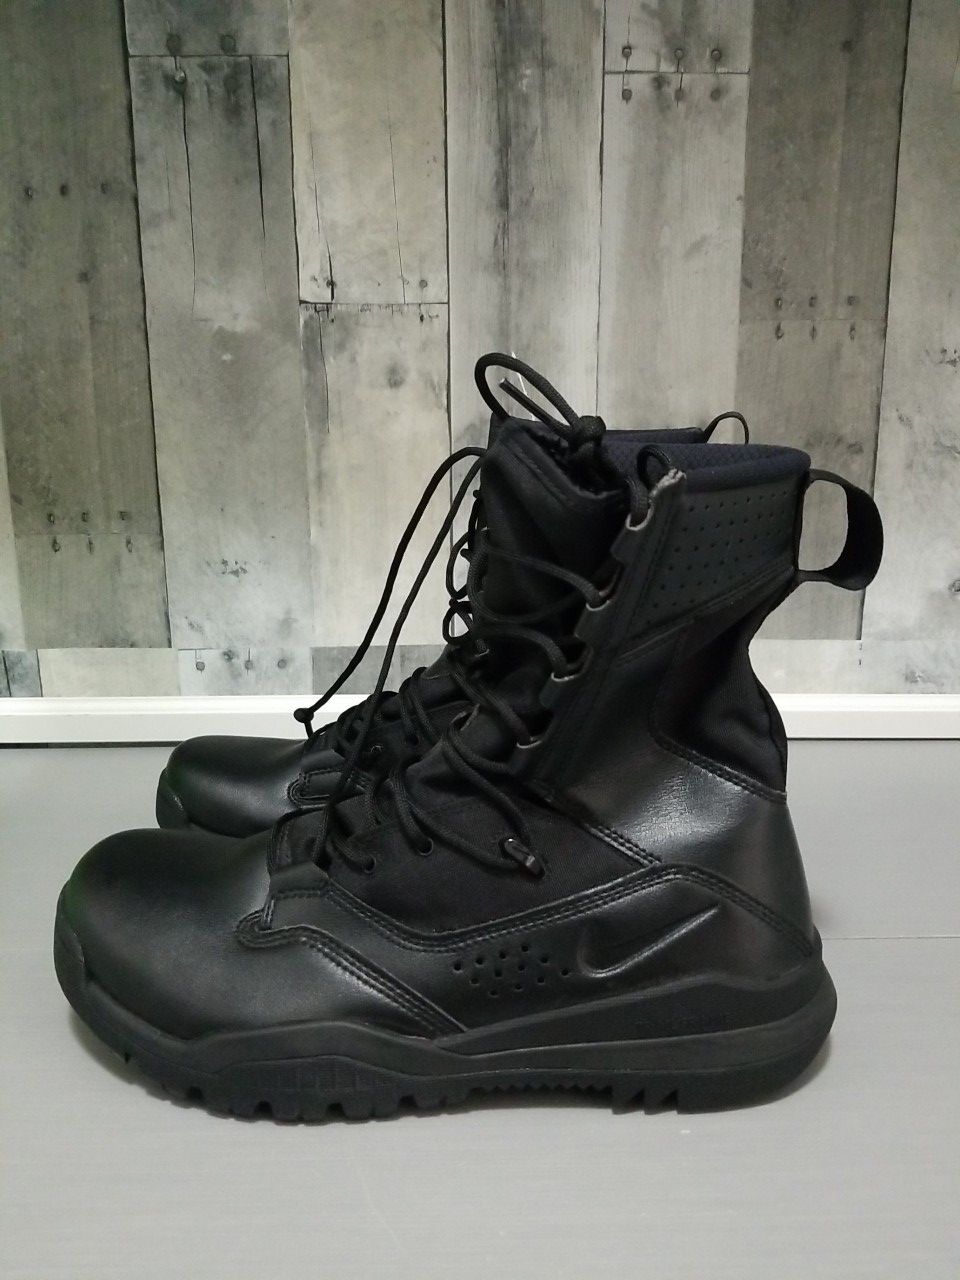 Nike SFB Field 2 8" Black Military Combat Boots AO7507 001 Mens Size 9.5